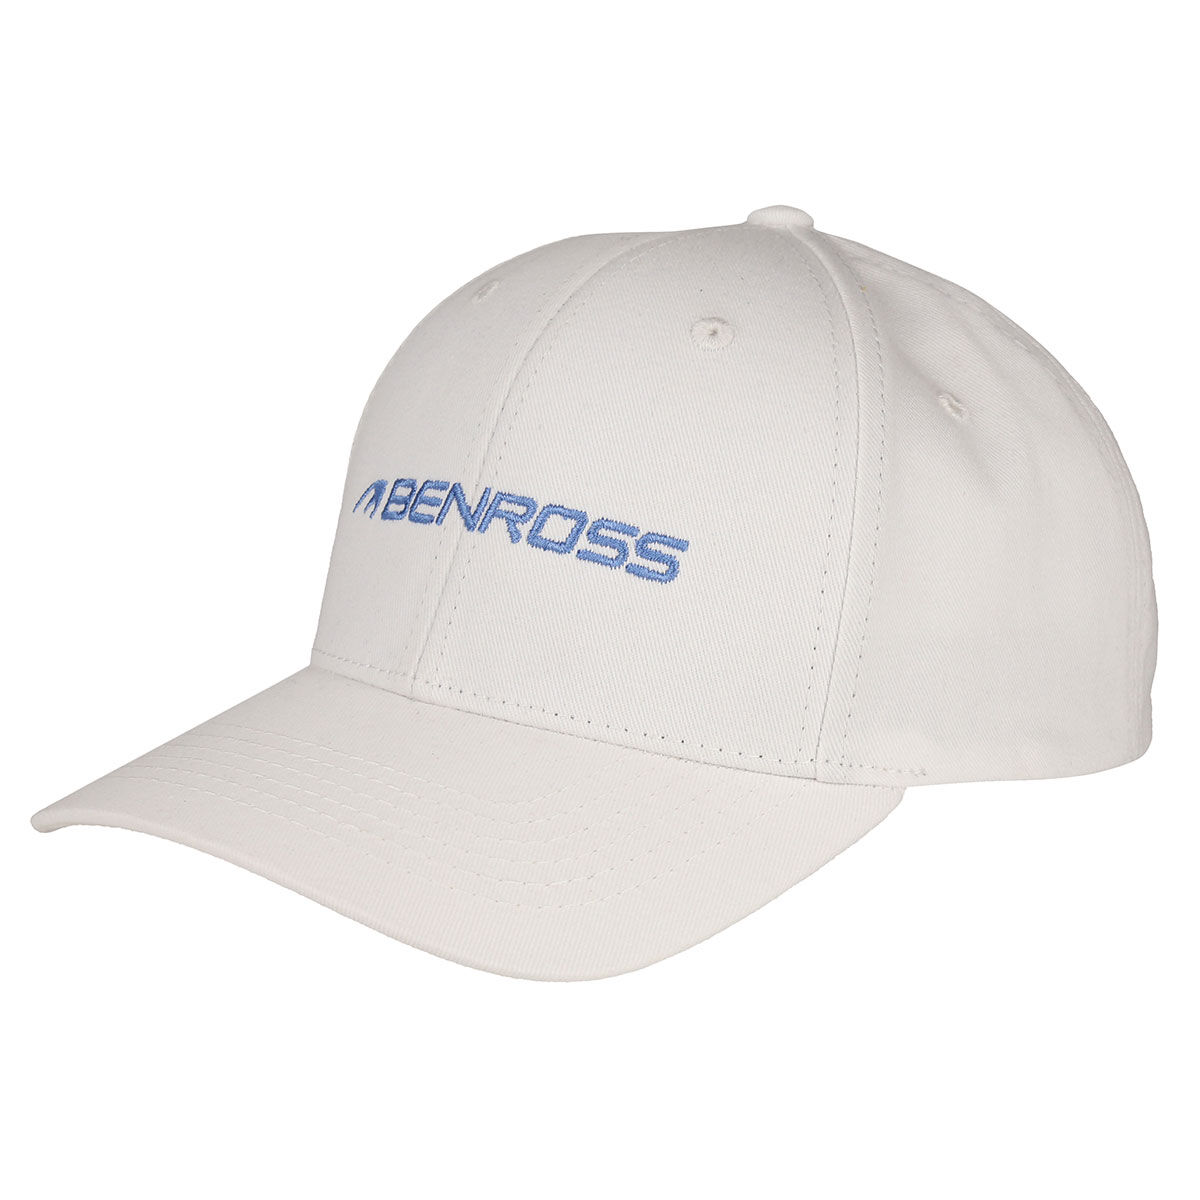 Benross Womens Core Logo Golf Cap, Female, White/baby blue, One size | American Golf - Father's Day Gift von Benross